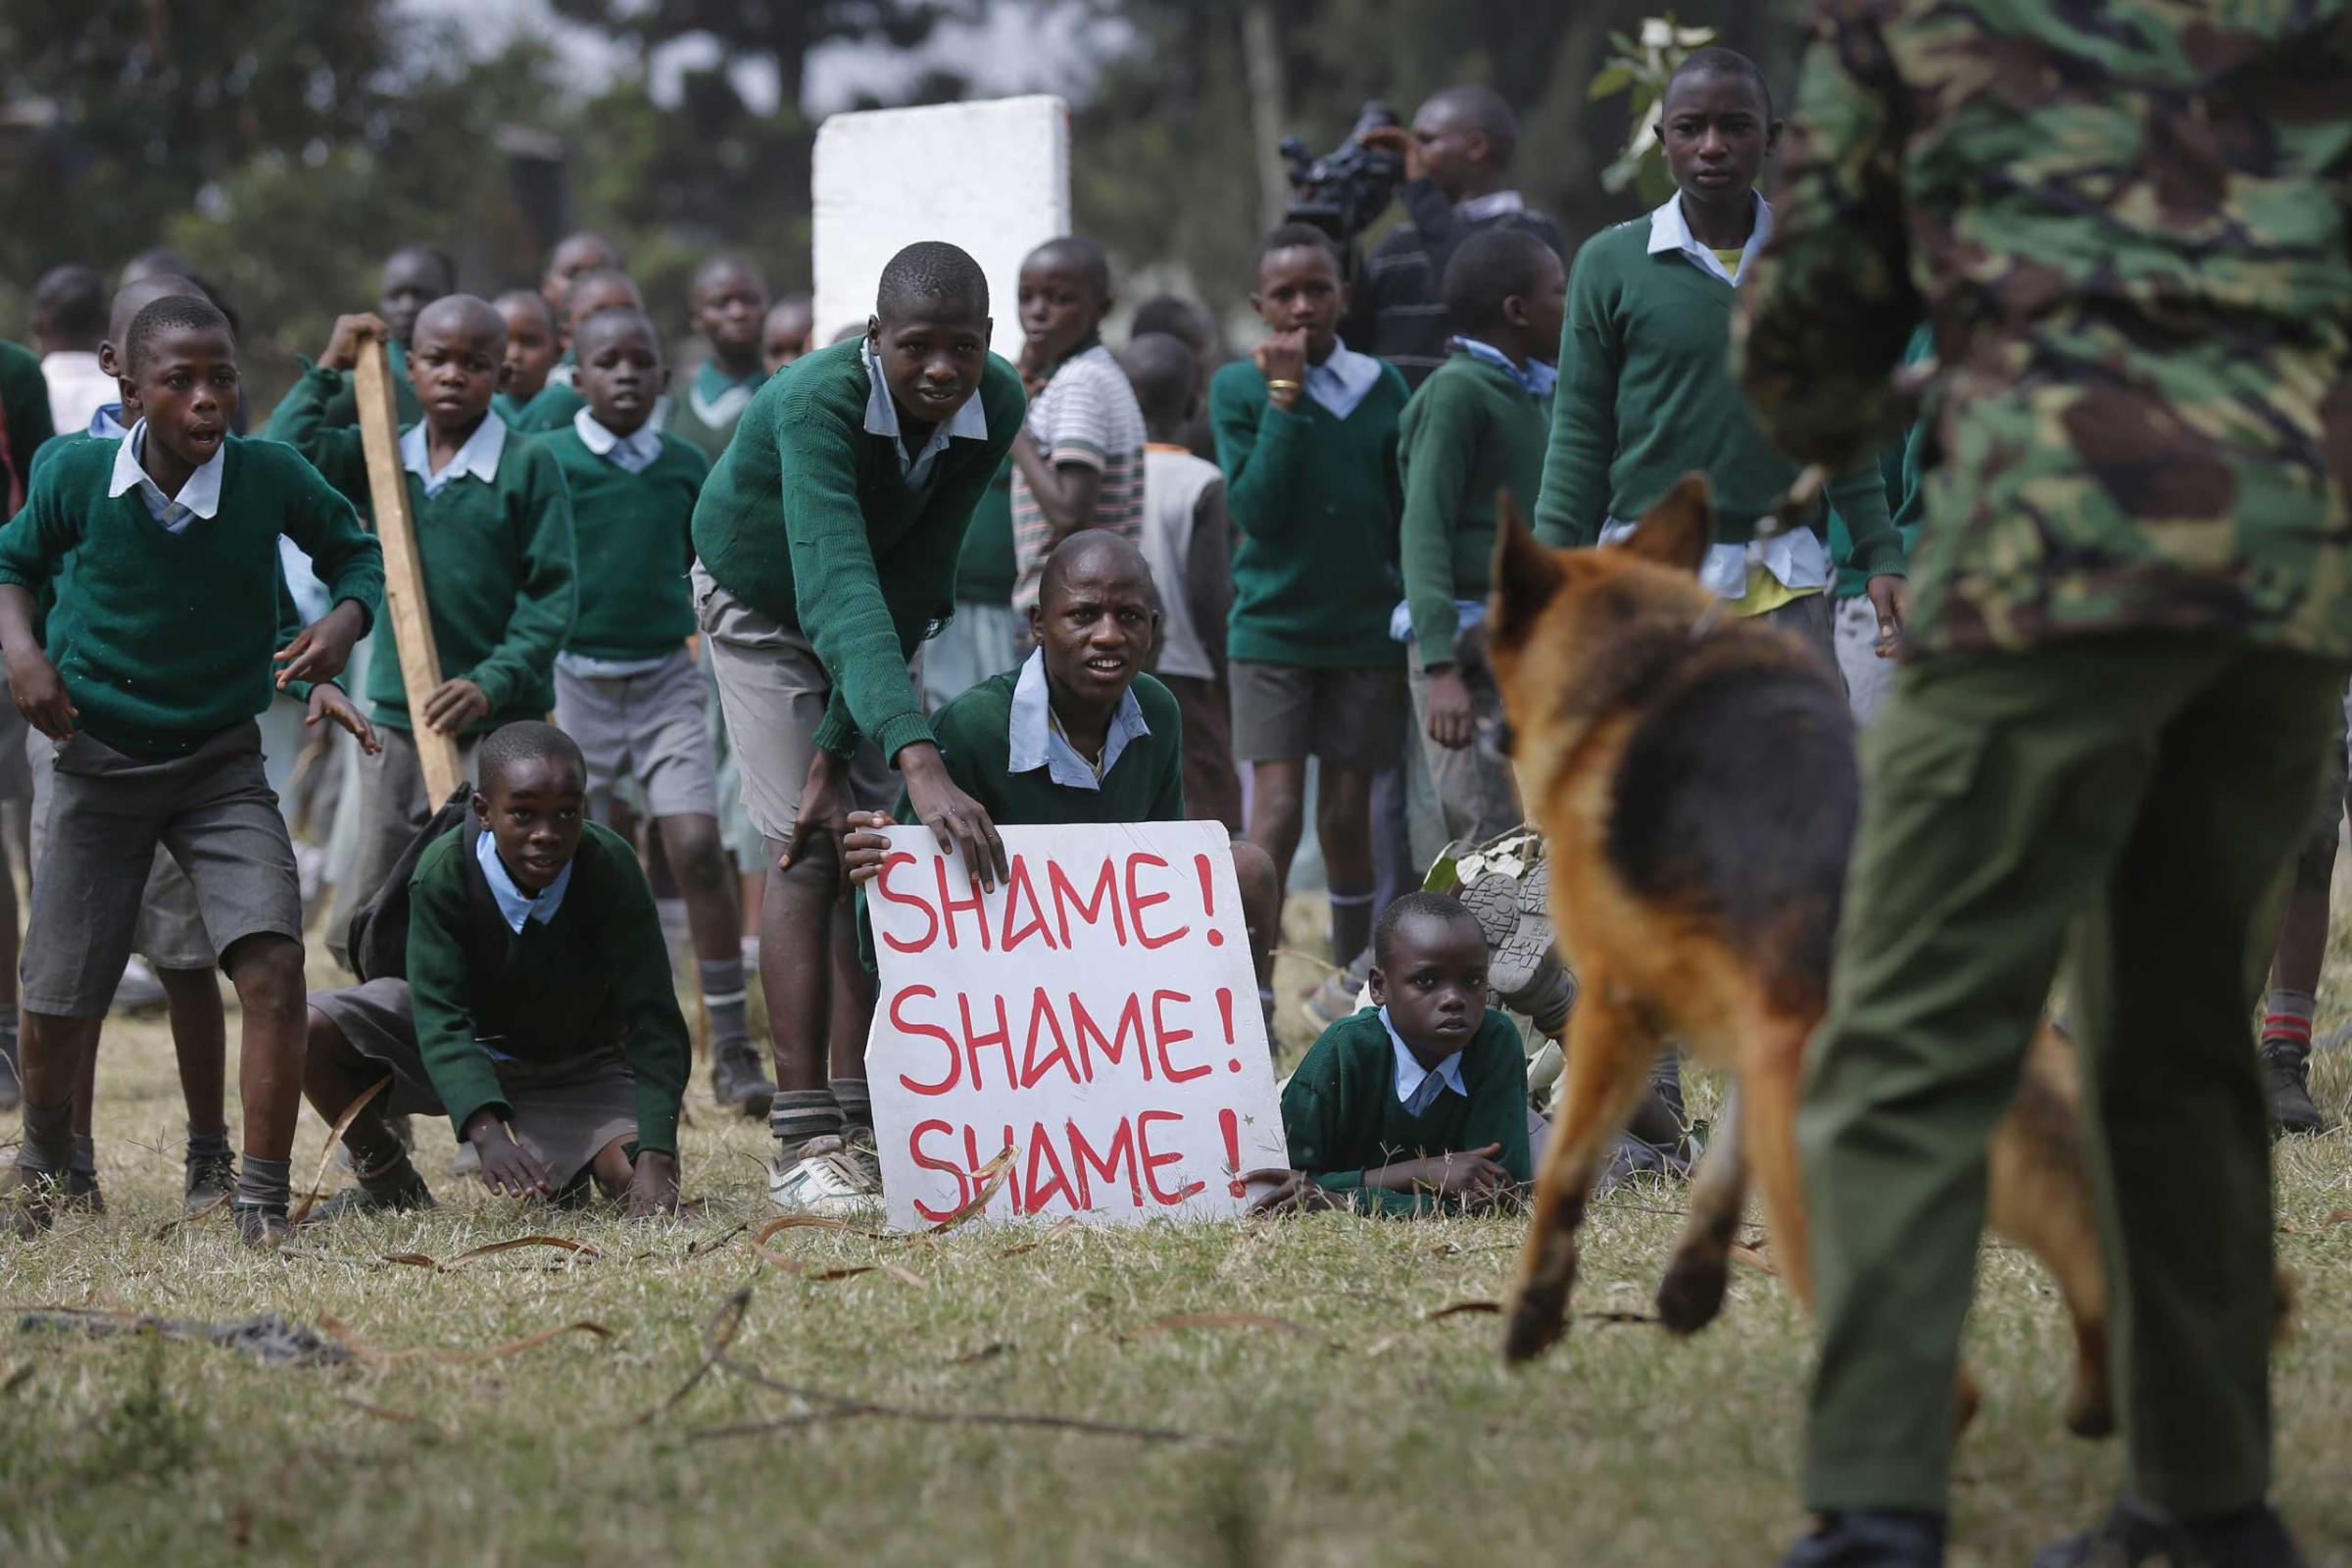 Police in Kenya fire teargas canisters at school children